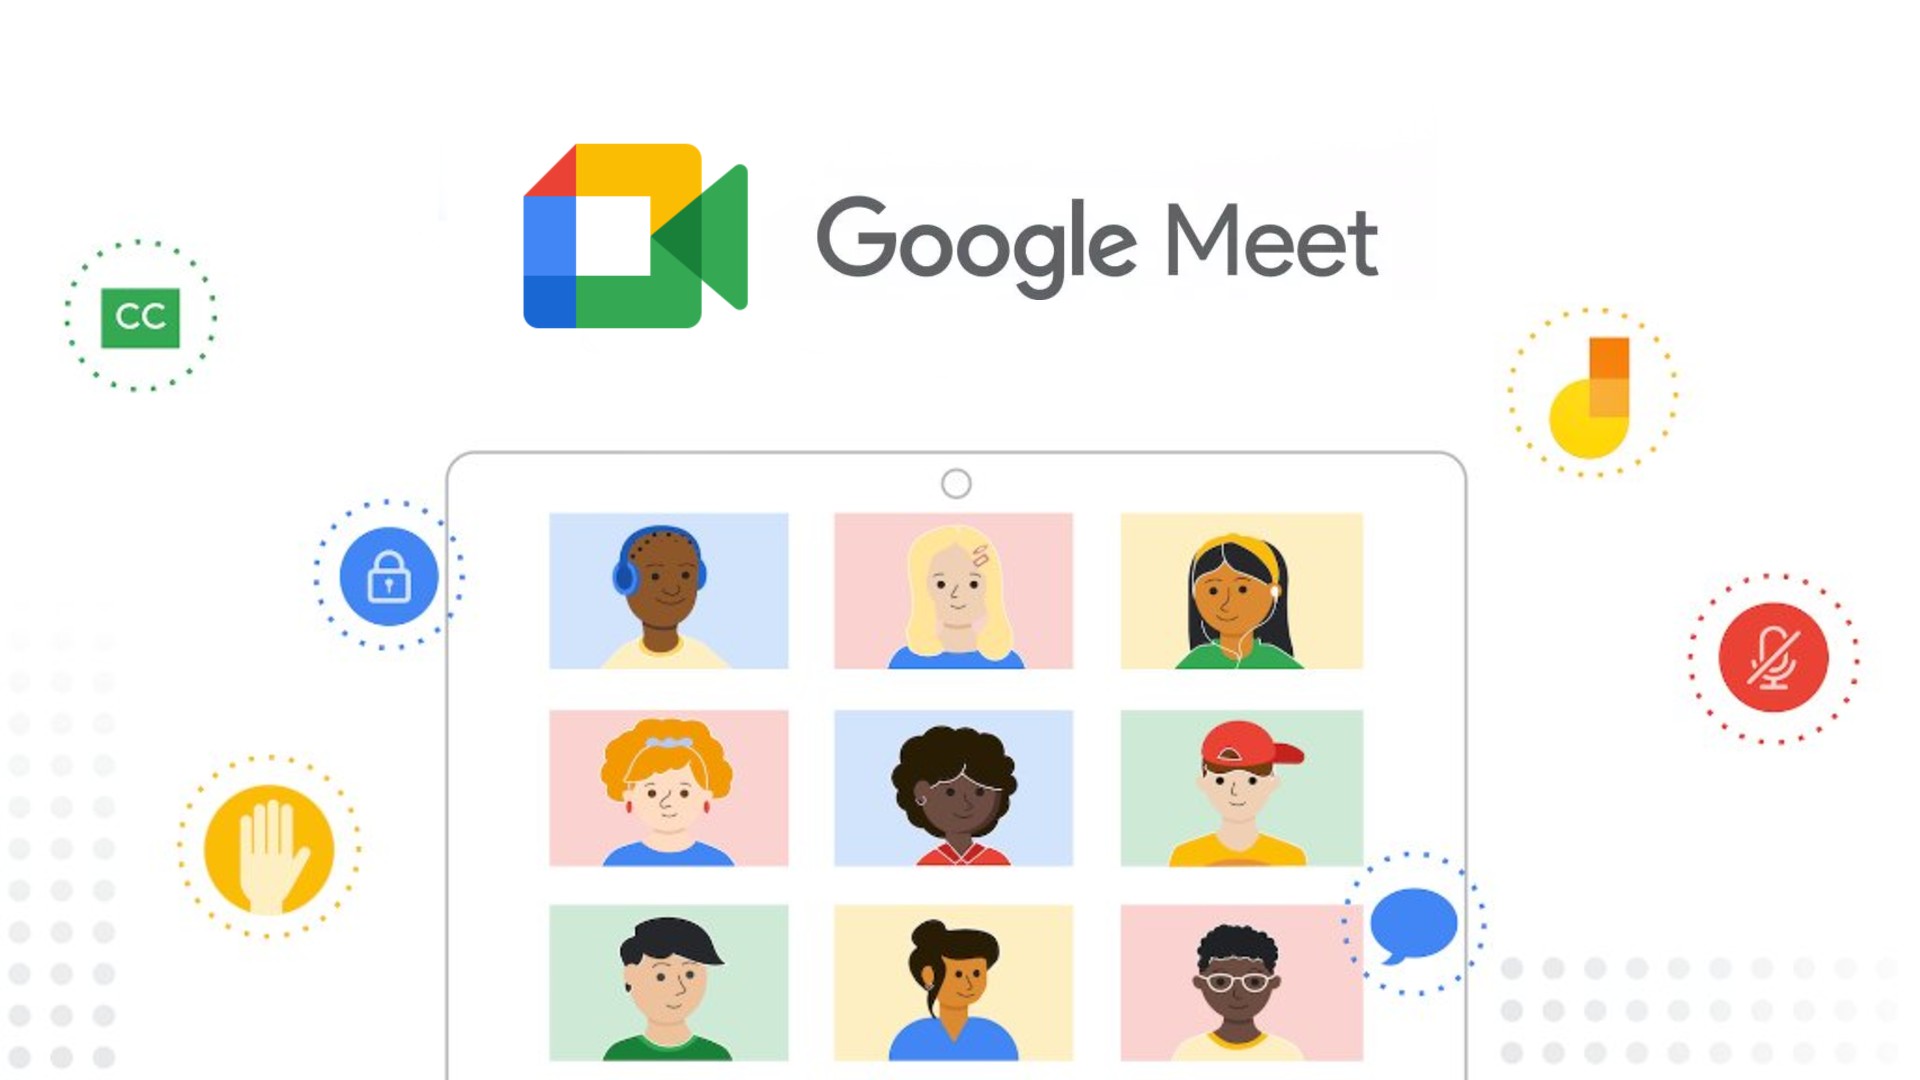 Google Meet: The Potential Candidate to Conduct Online Meetings